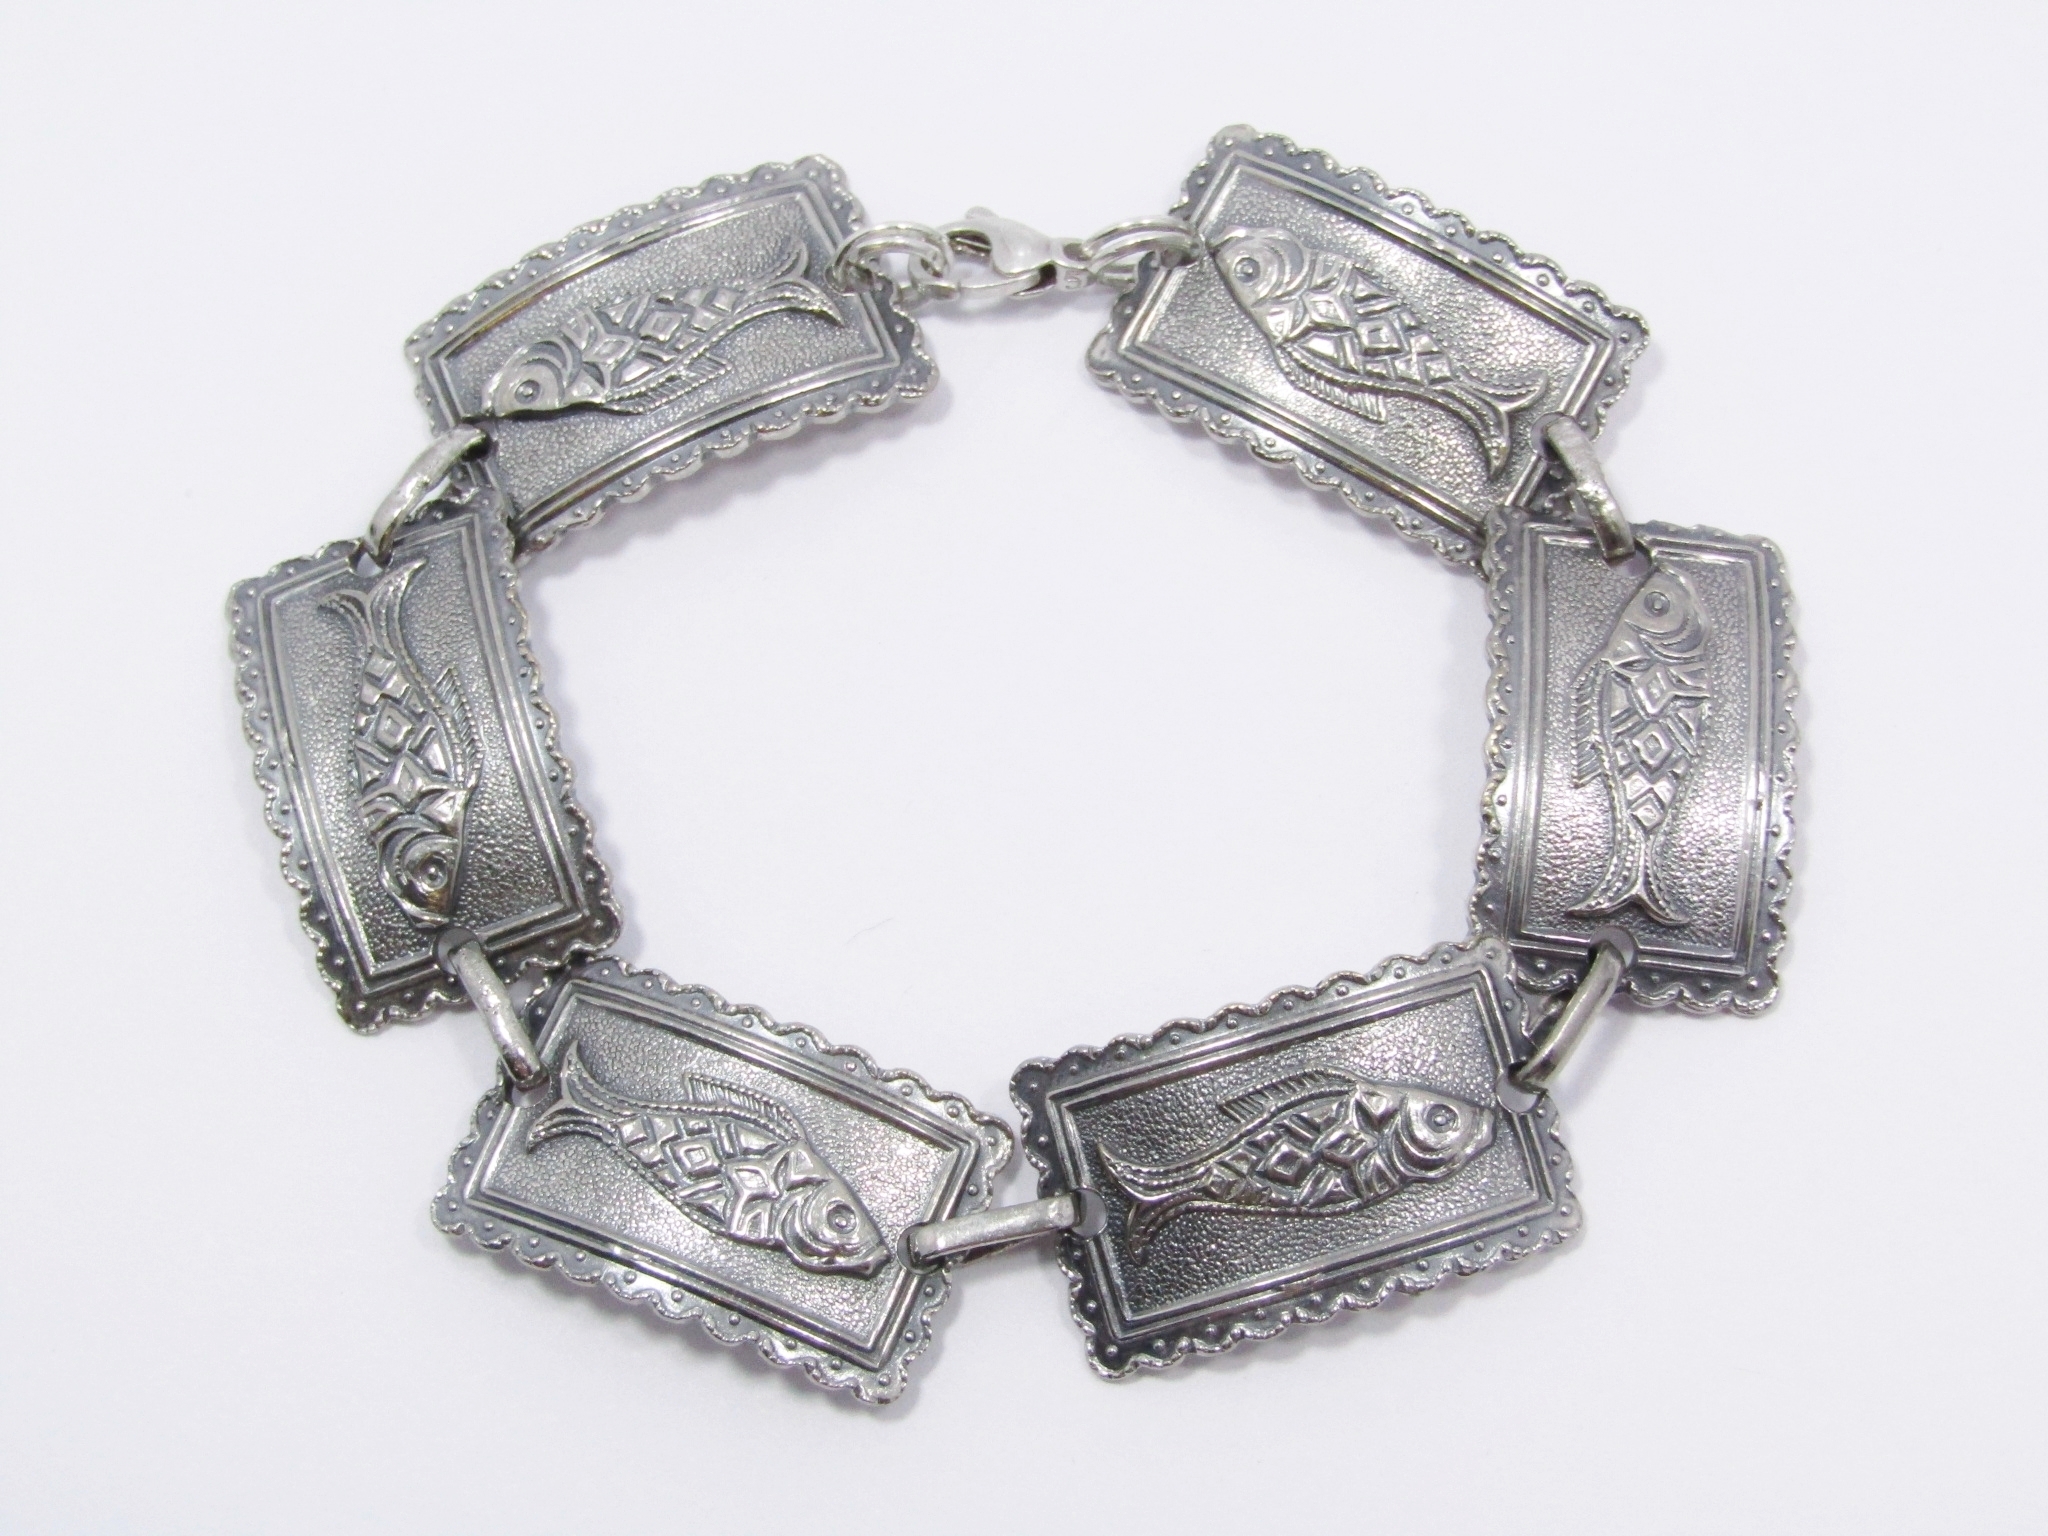 A Gorgeous Engraved Textured Design Bracelet in Silver.